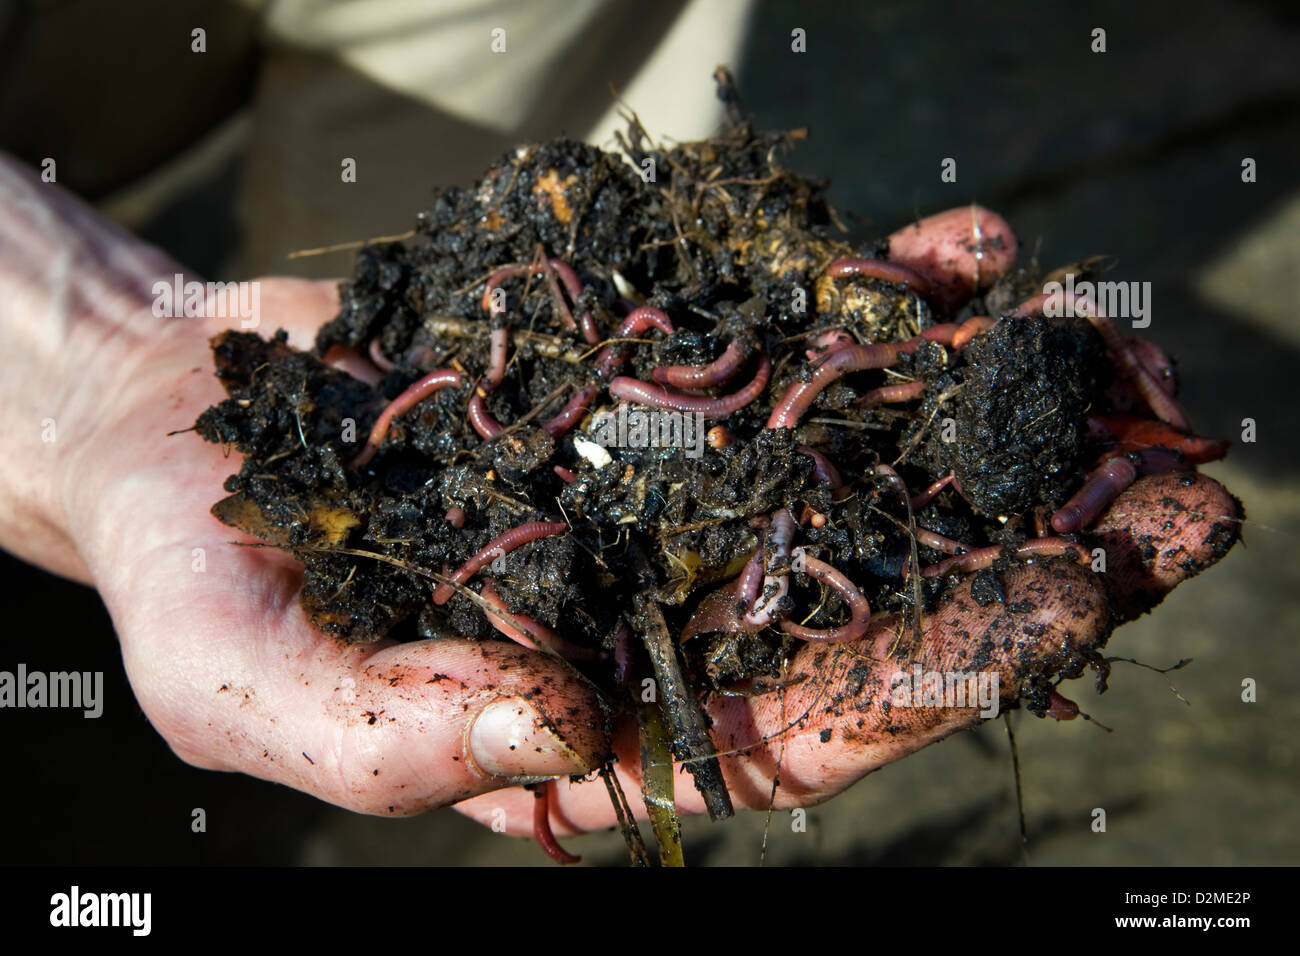 Close up of a mans hand holding earth worms in freshly dug soil from compost heap Stock Photo